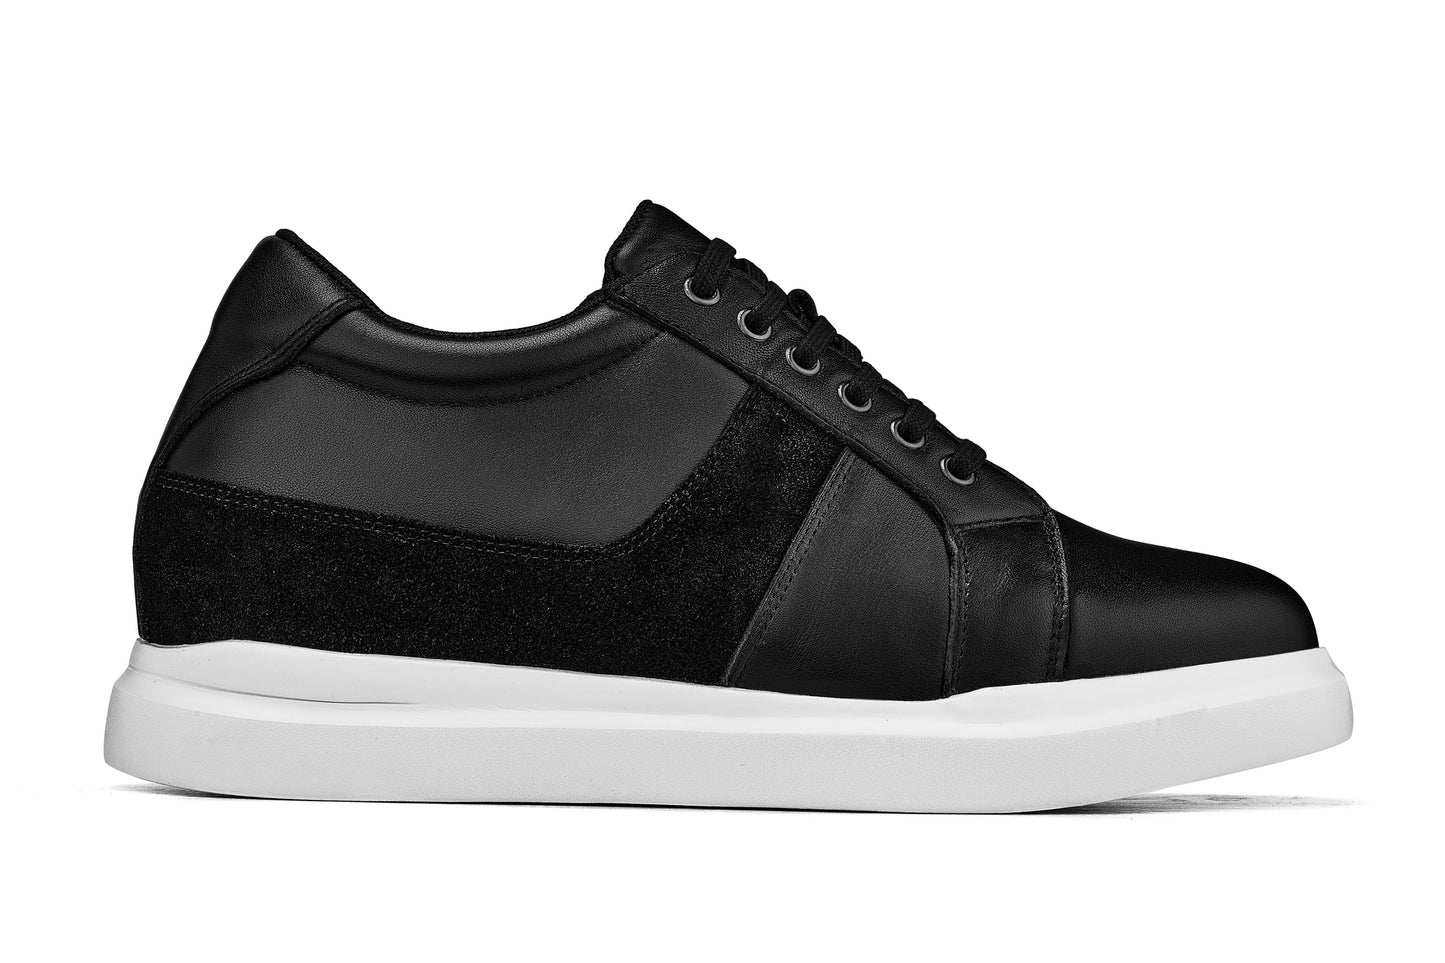 CALTO - K1530 - 3 Inches Taller (Black) - Lightweight Leather Sneakers